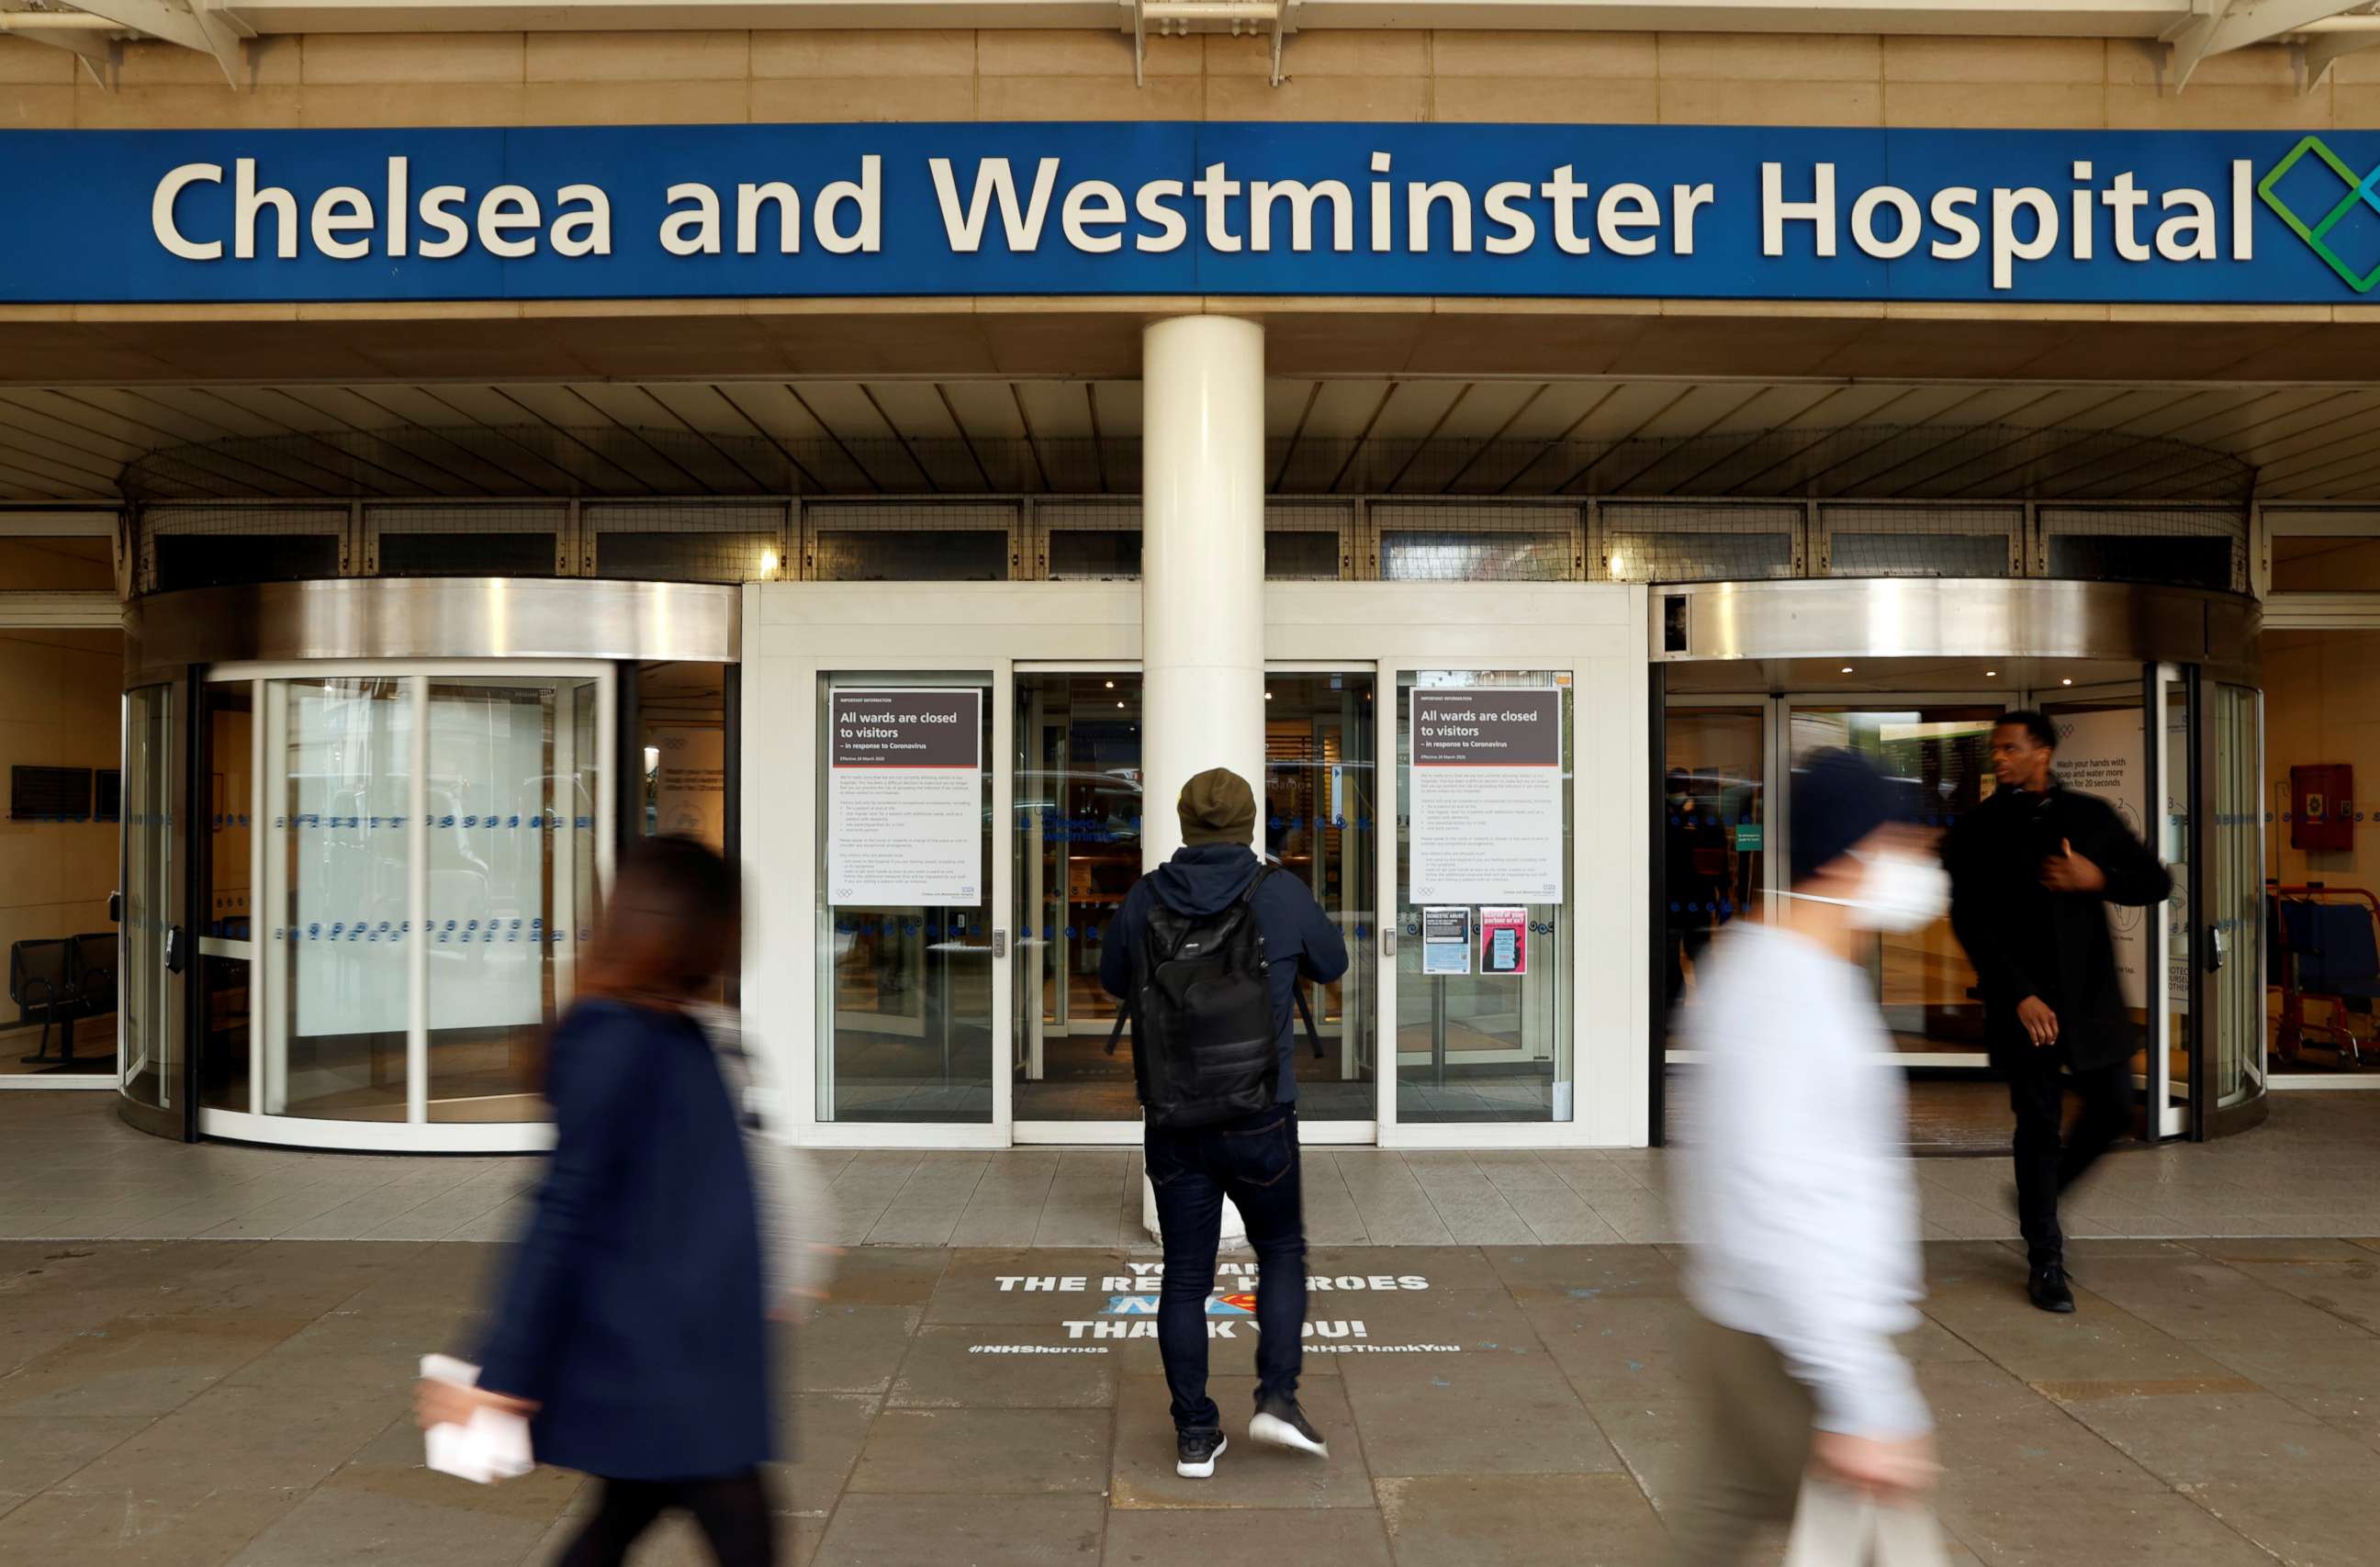 PHOTO: People walk past an entrance to the Chelsea and Westminster Hospital during the outbreak of the coronavirus disease, London, April 29, 2020.